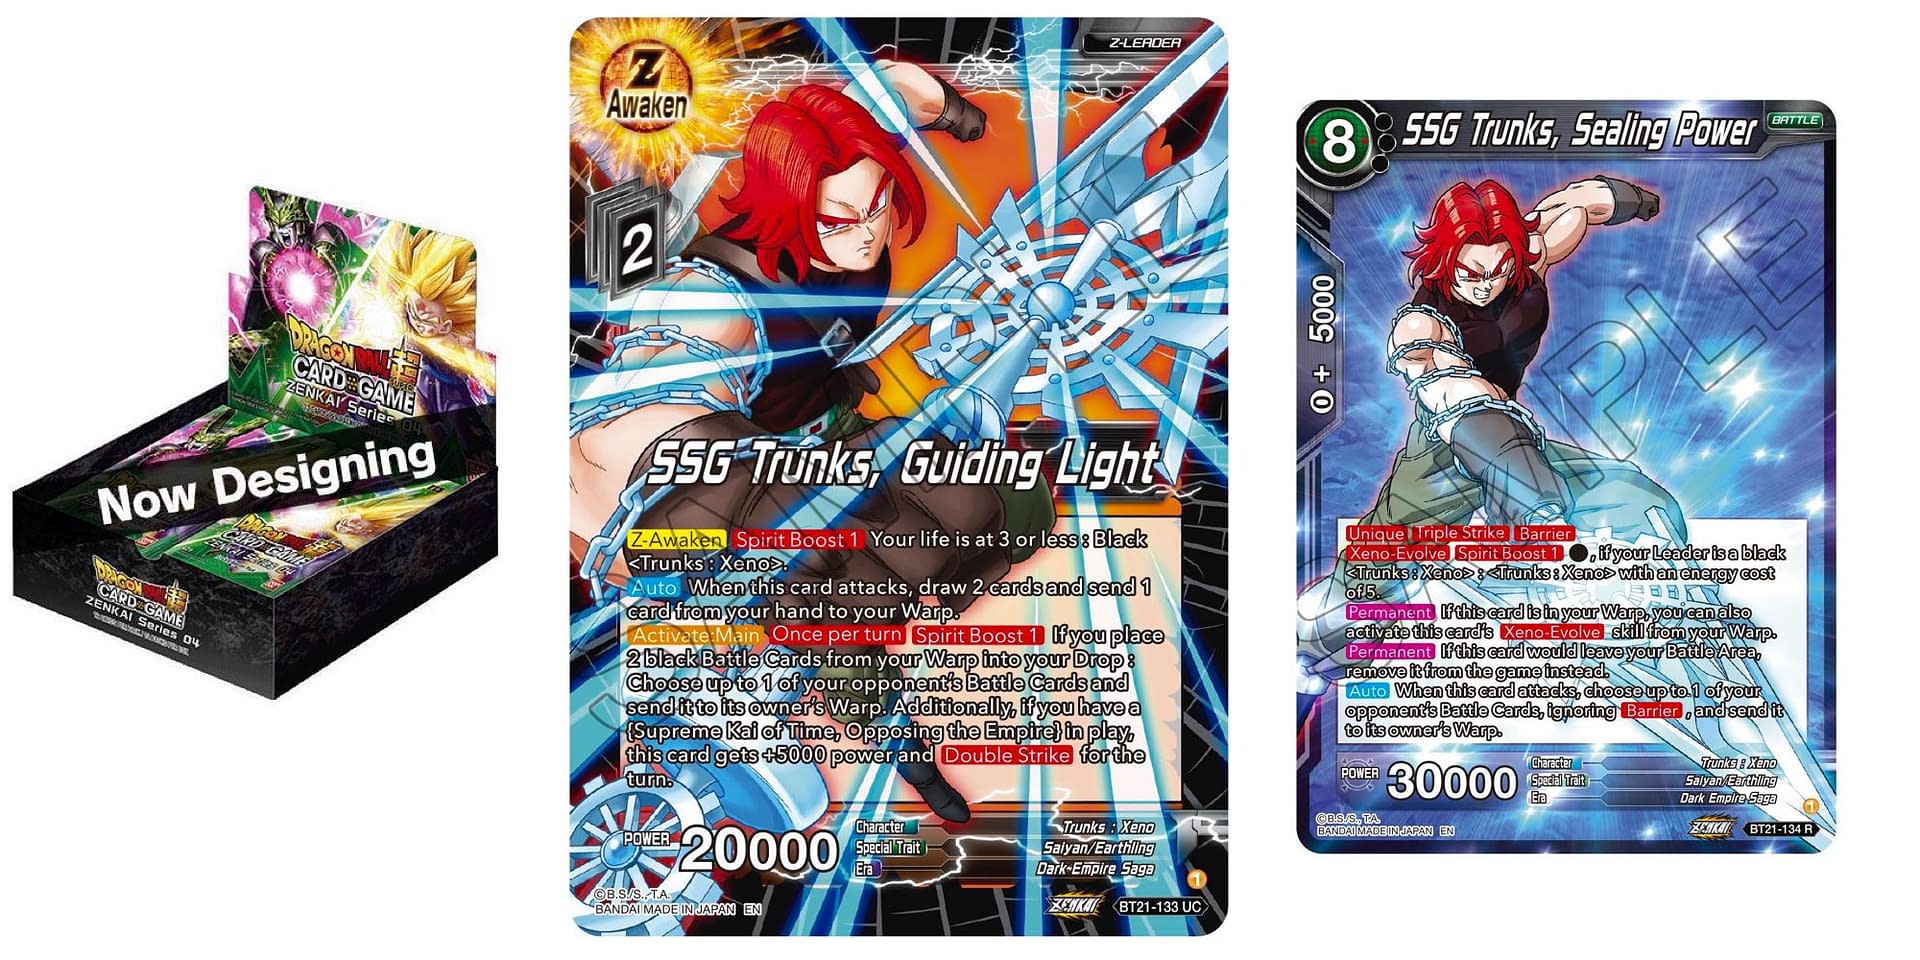 Dragon Ball Super Card Game: How To Get Started With the Zenkai Series